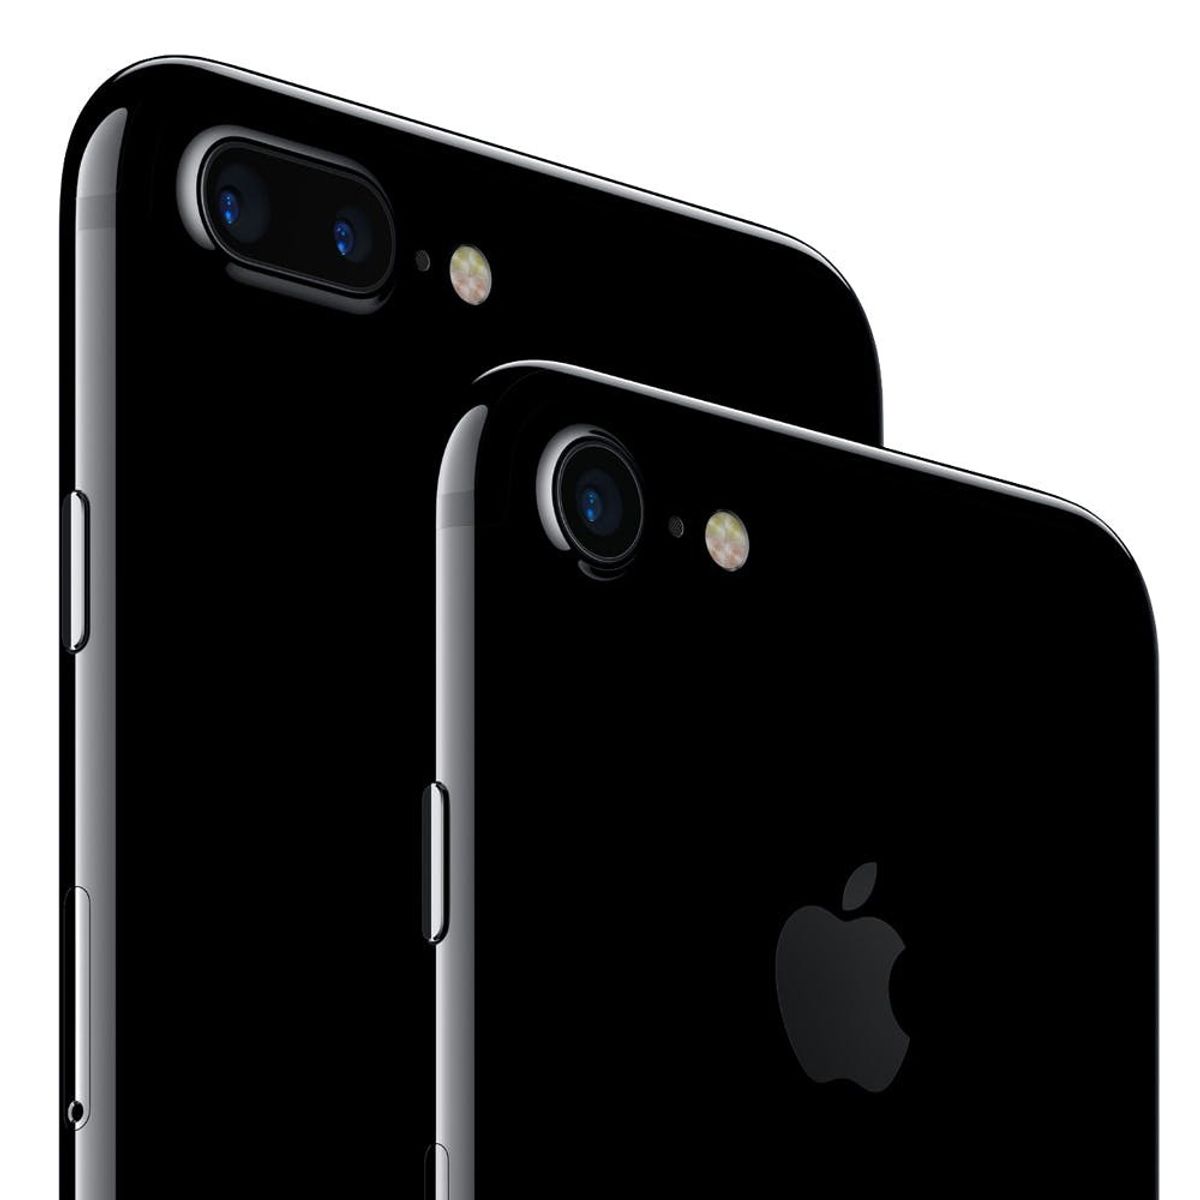 Oh Boy, You’ll Have to Wait for a Jet Black iPhone 7